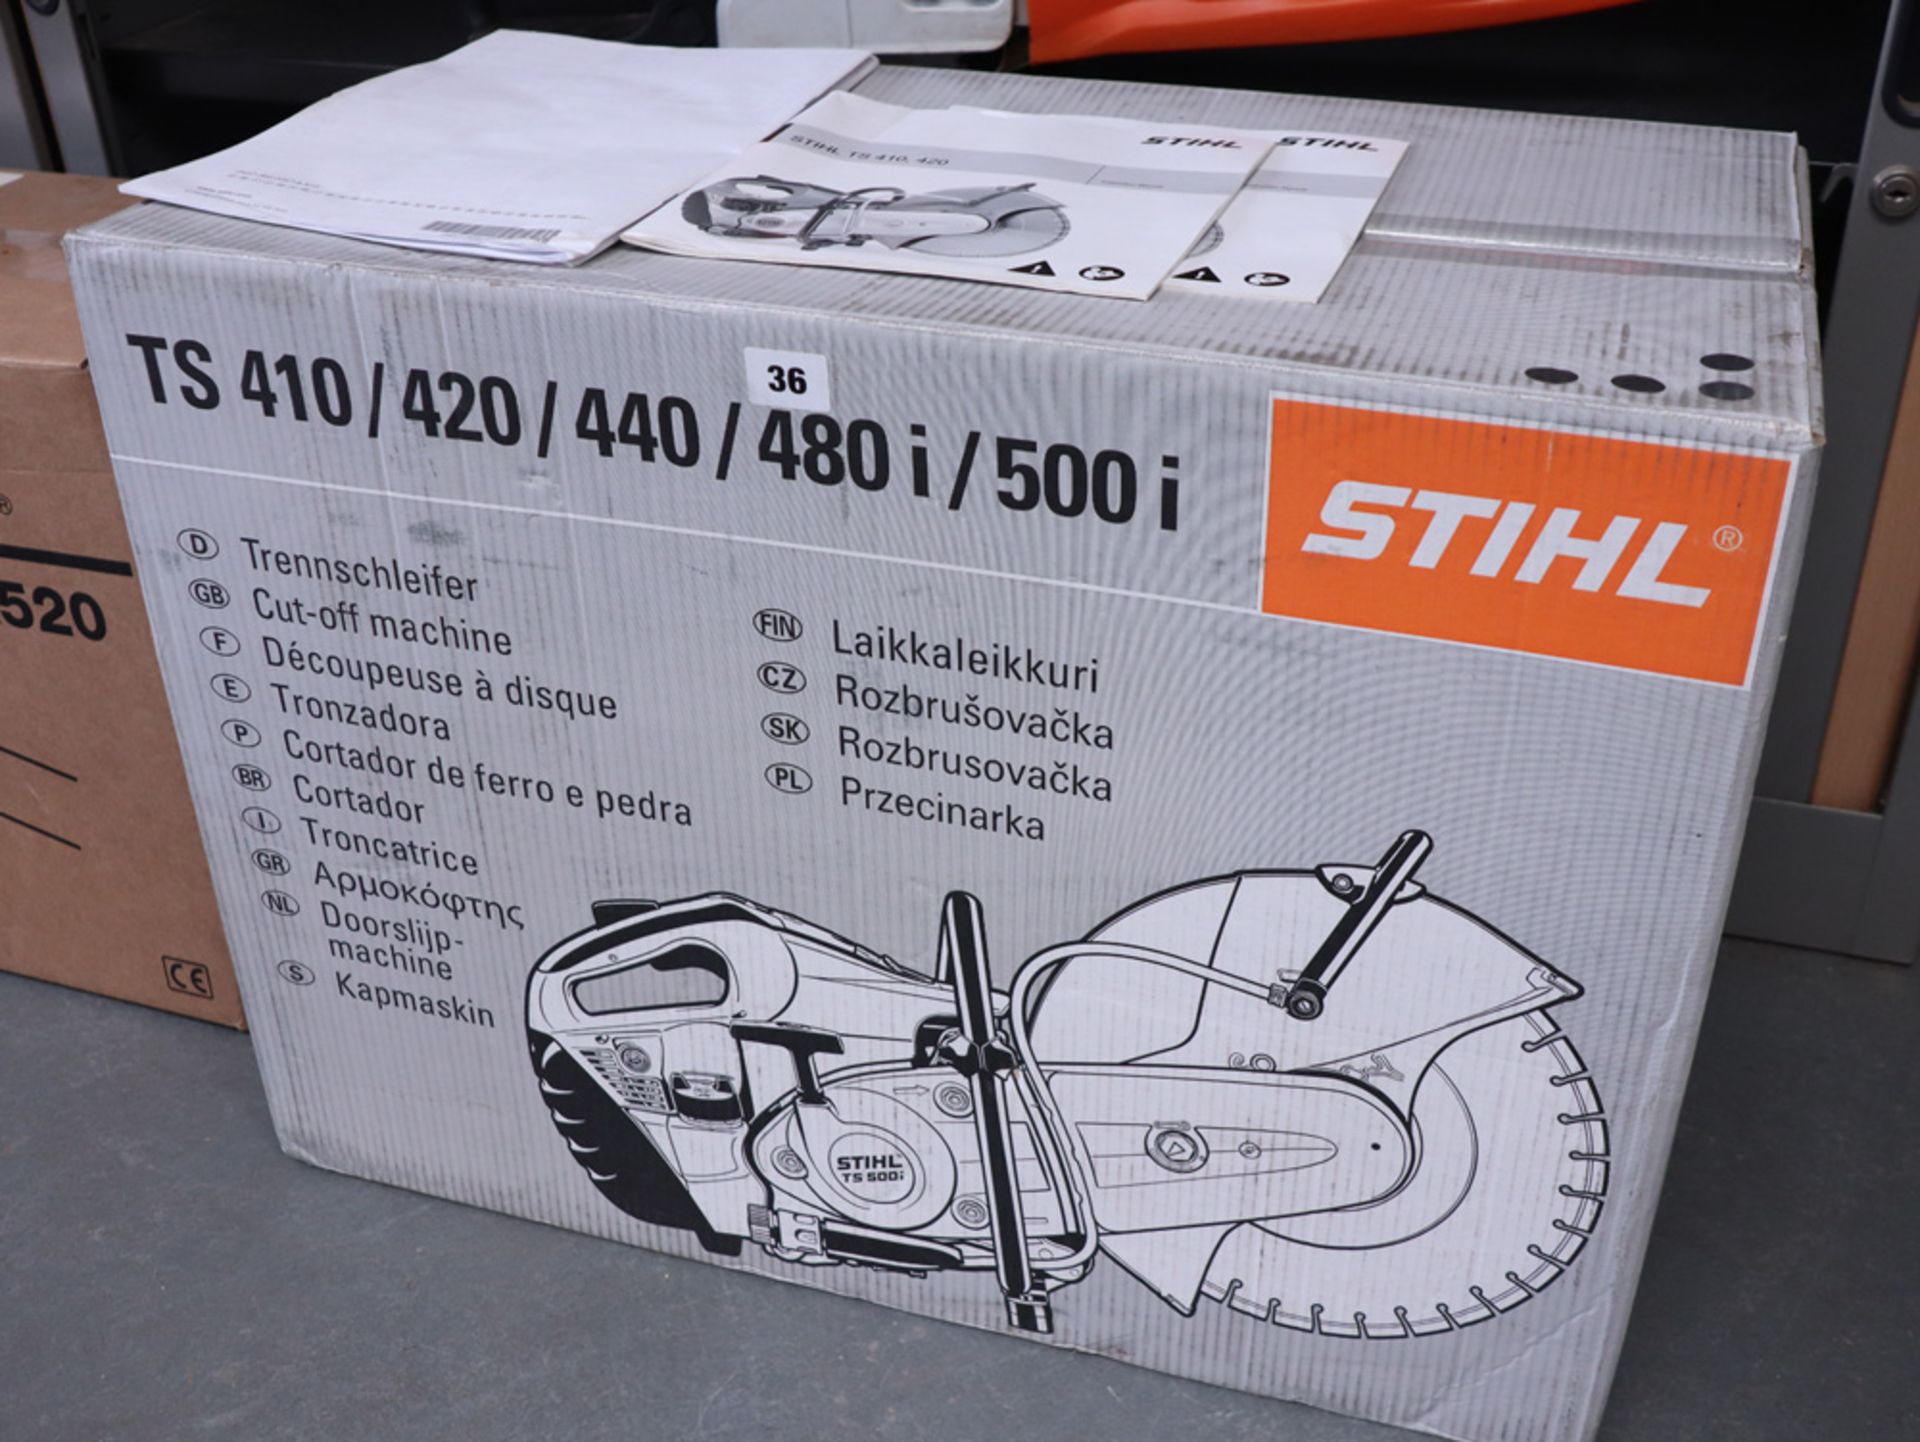 Stihl TS410 petrol engine site saw in original box with instructions